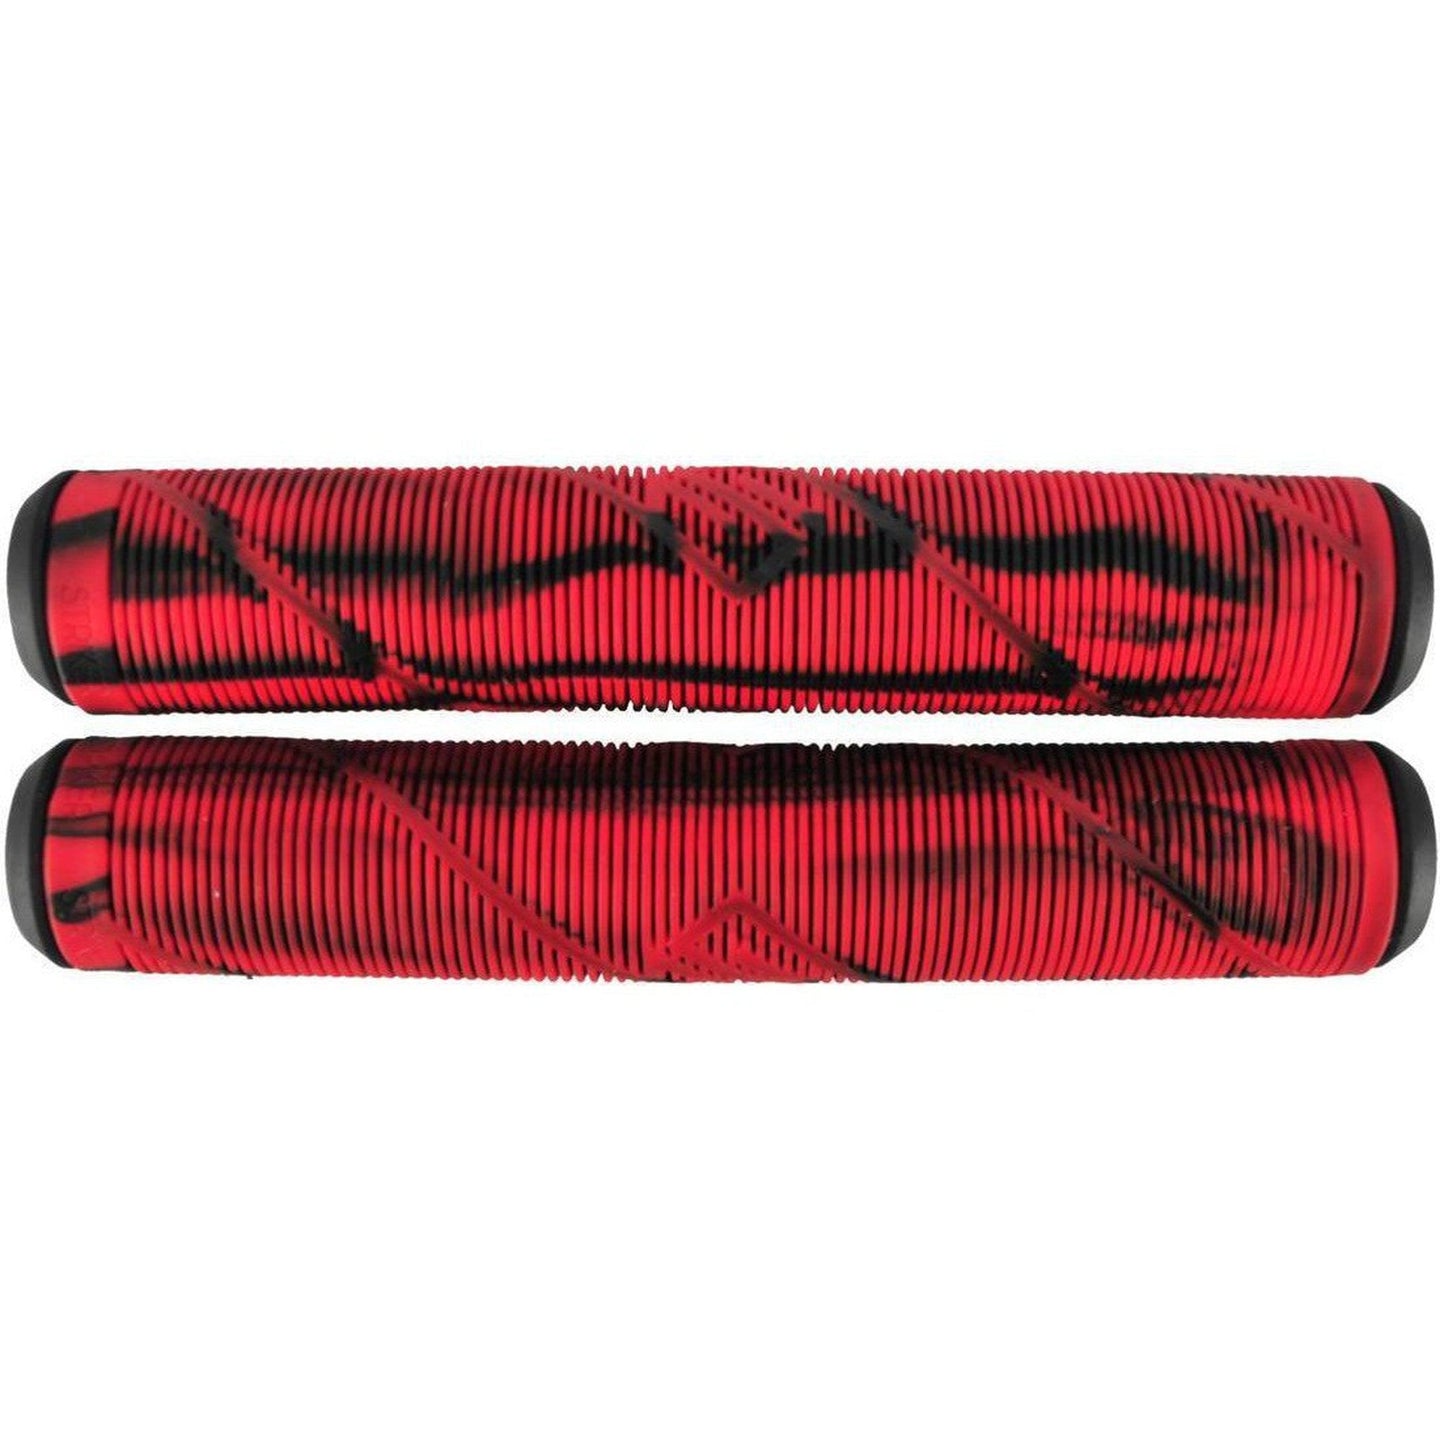 Striker Logo Scooter Grips Thick - Black/Red-Scooter Grips-Striker scooter parts